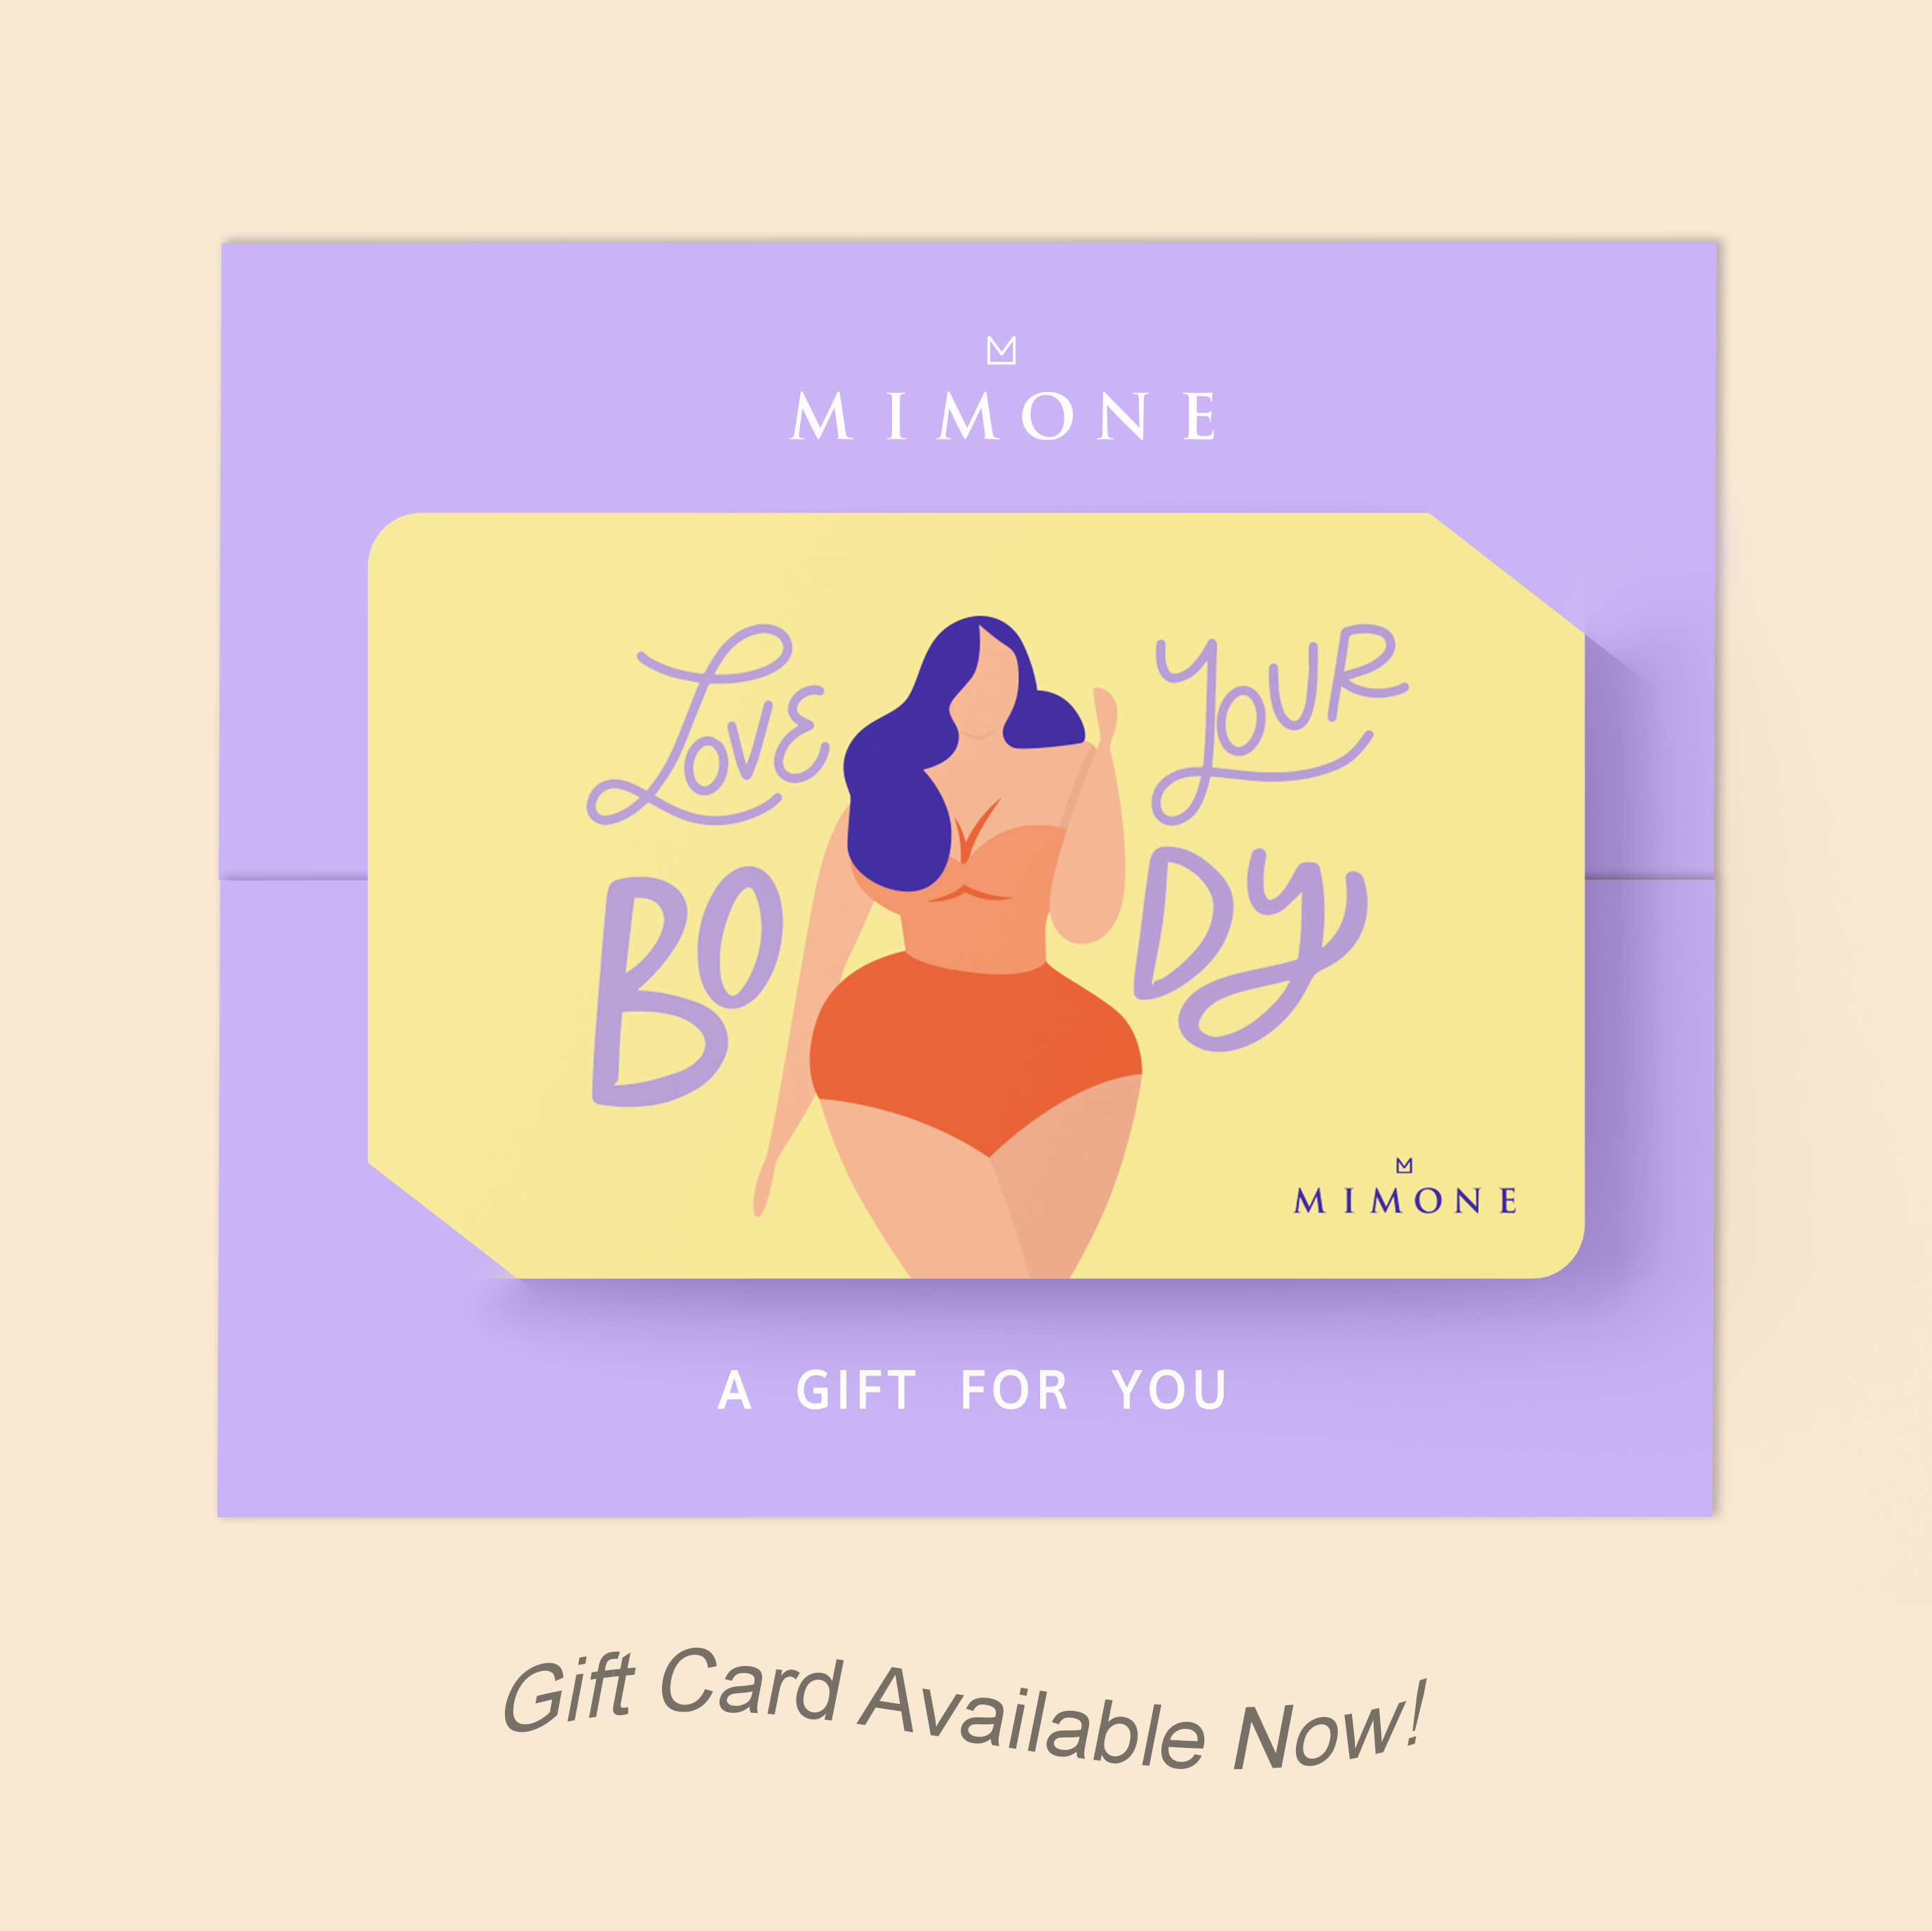 Physical Gift Card (In Store Use) Design A: Love Your Body